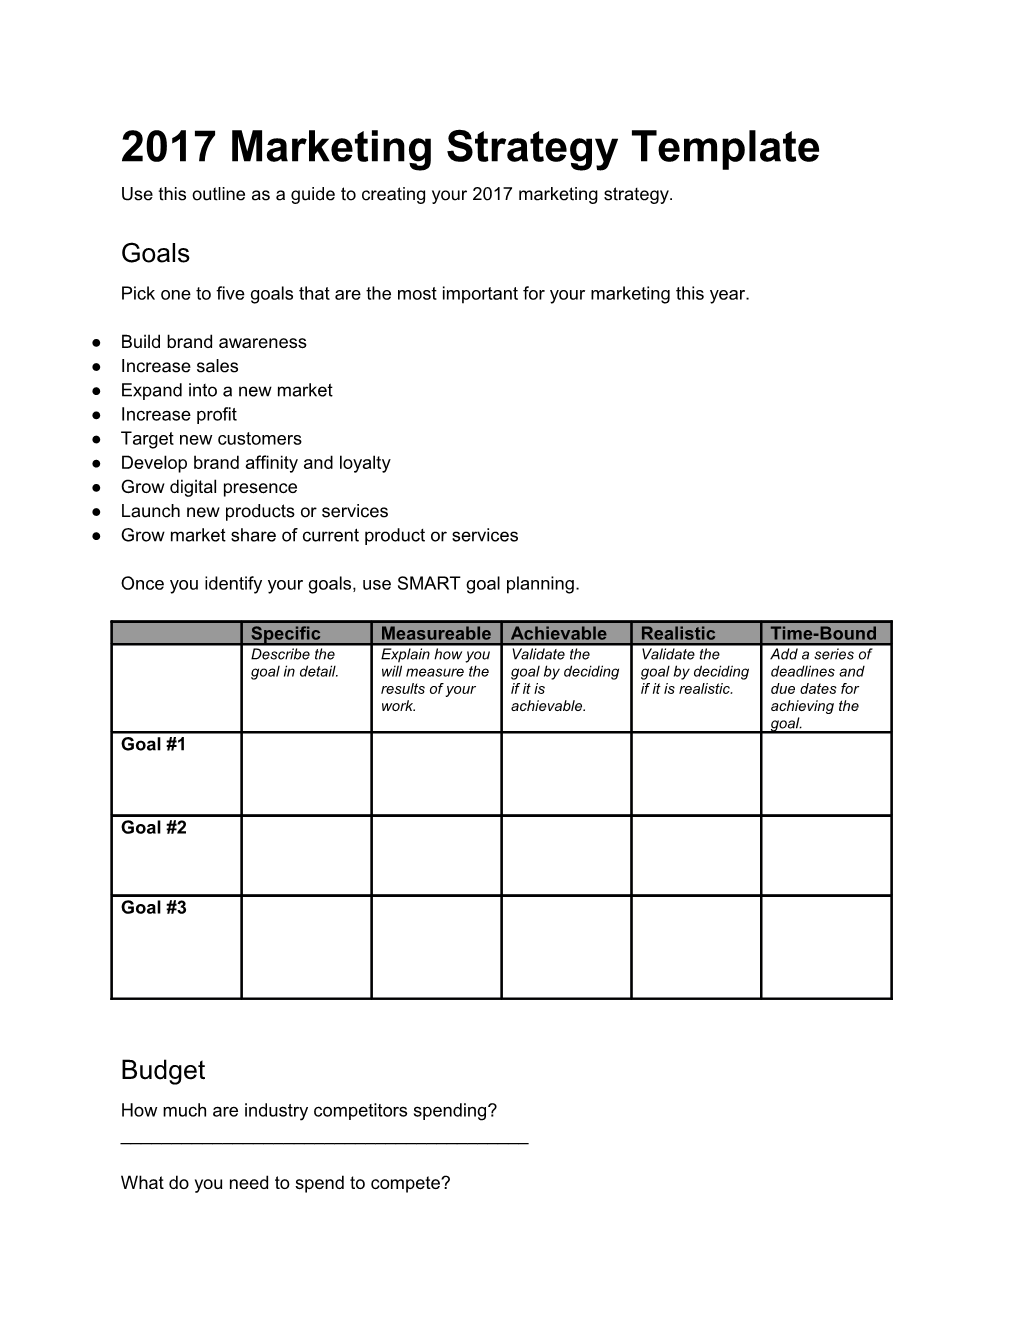 Use This Outline As a Guide to Creating Your 2017 Marketing Strategy